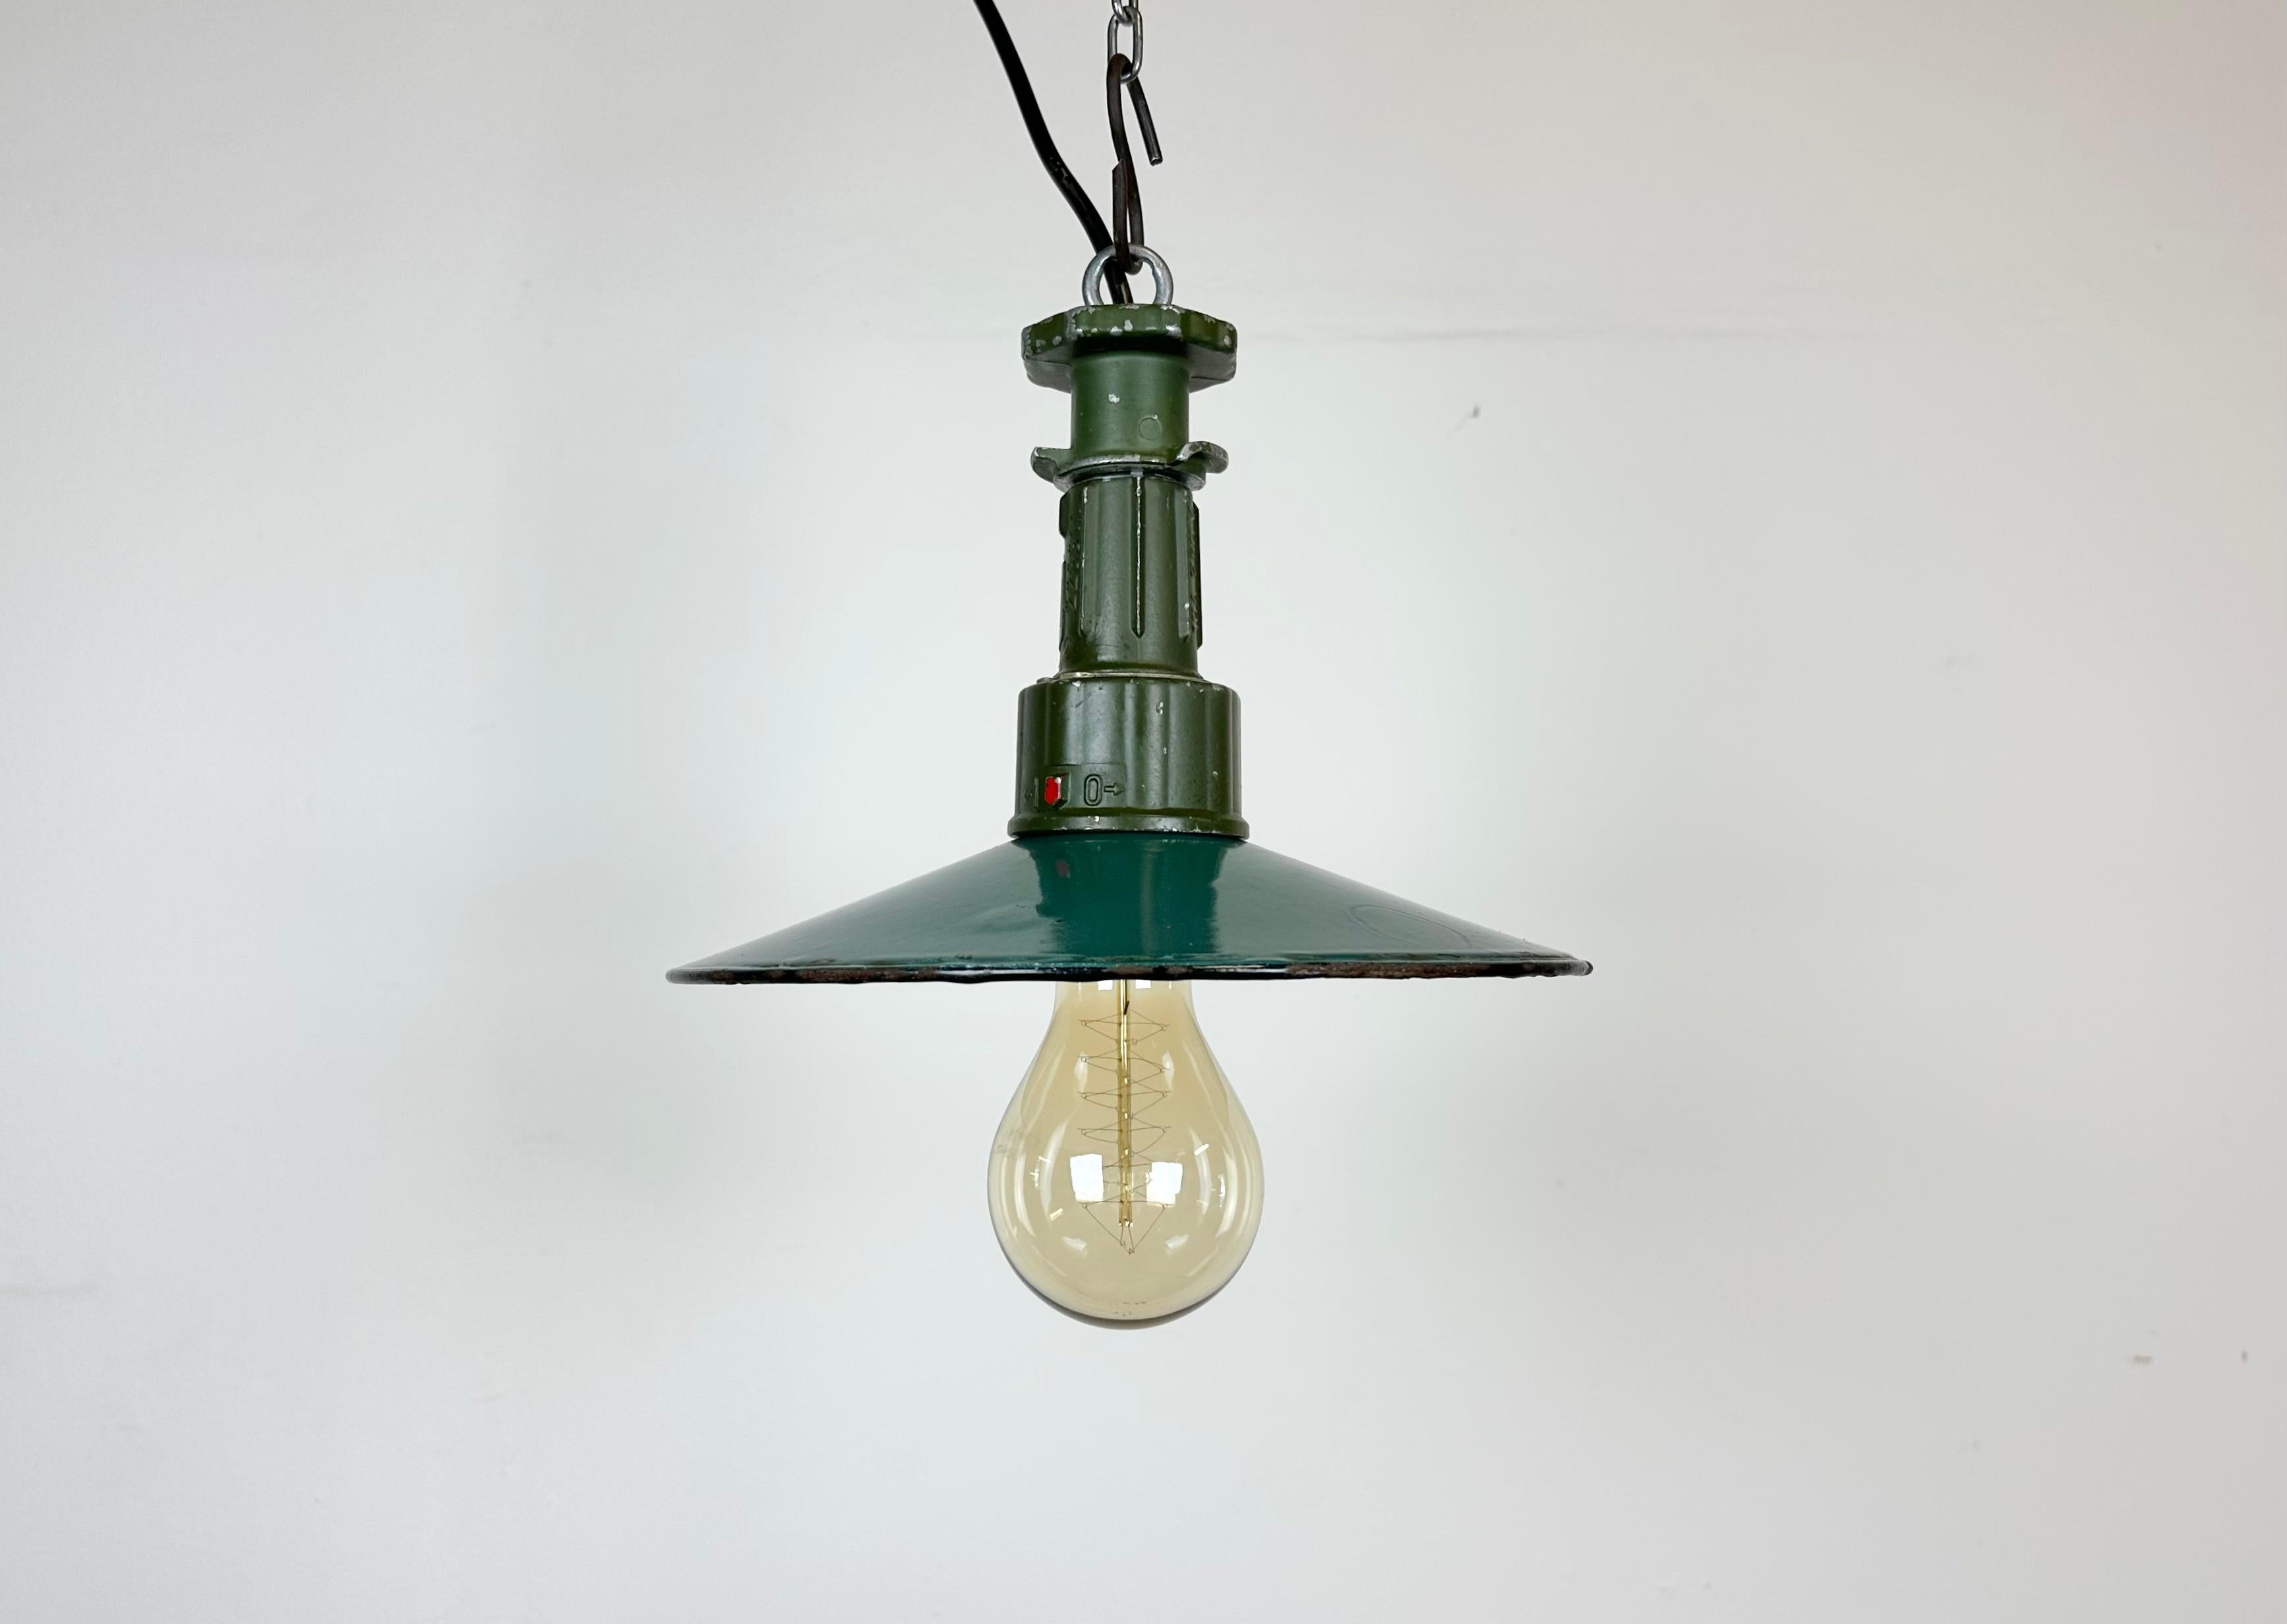 Industrial green enamel pendant light made in Poland during the 1960s. White enamel inside the shade. Green cast aluminium top. The socket requires E 27/ E26 light bulbs. New wire. The weight of the lamp is 0.5 kg.
The light bulb is not included.